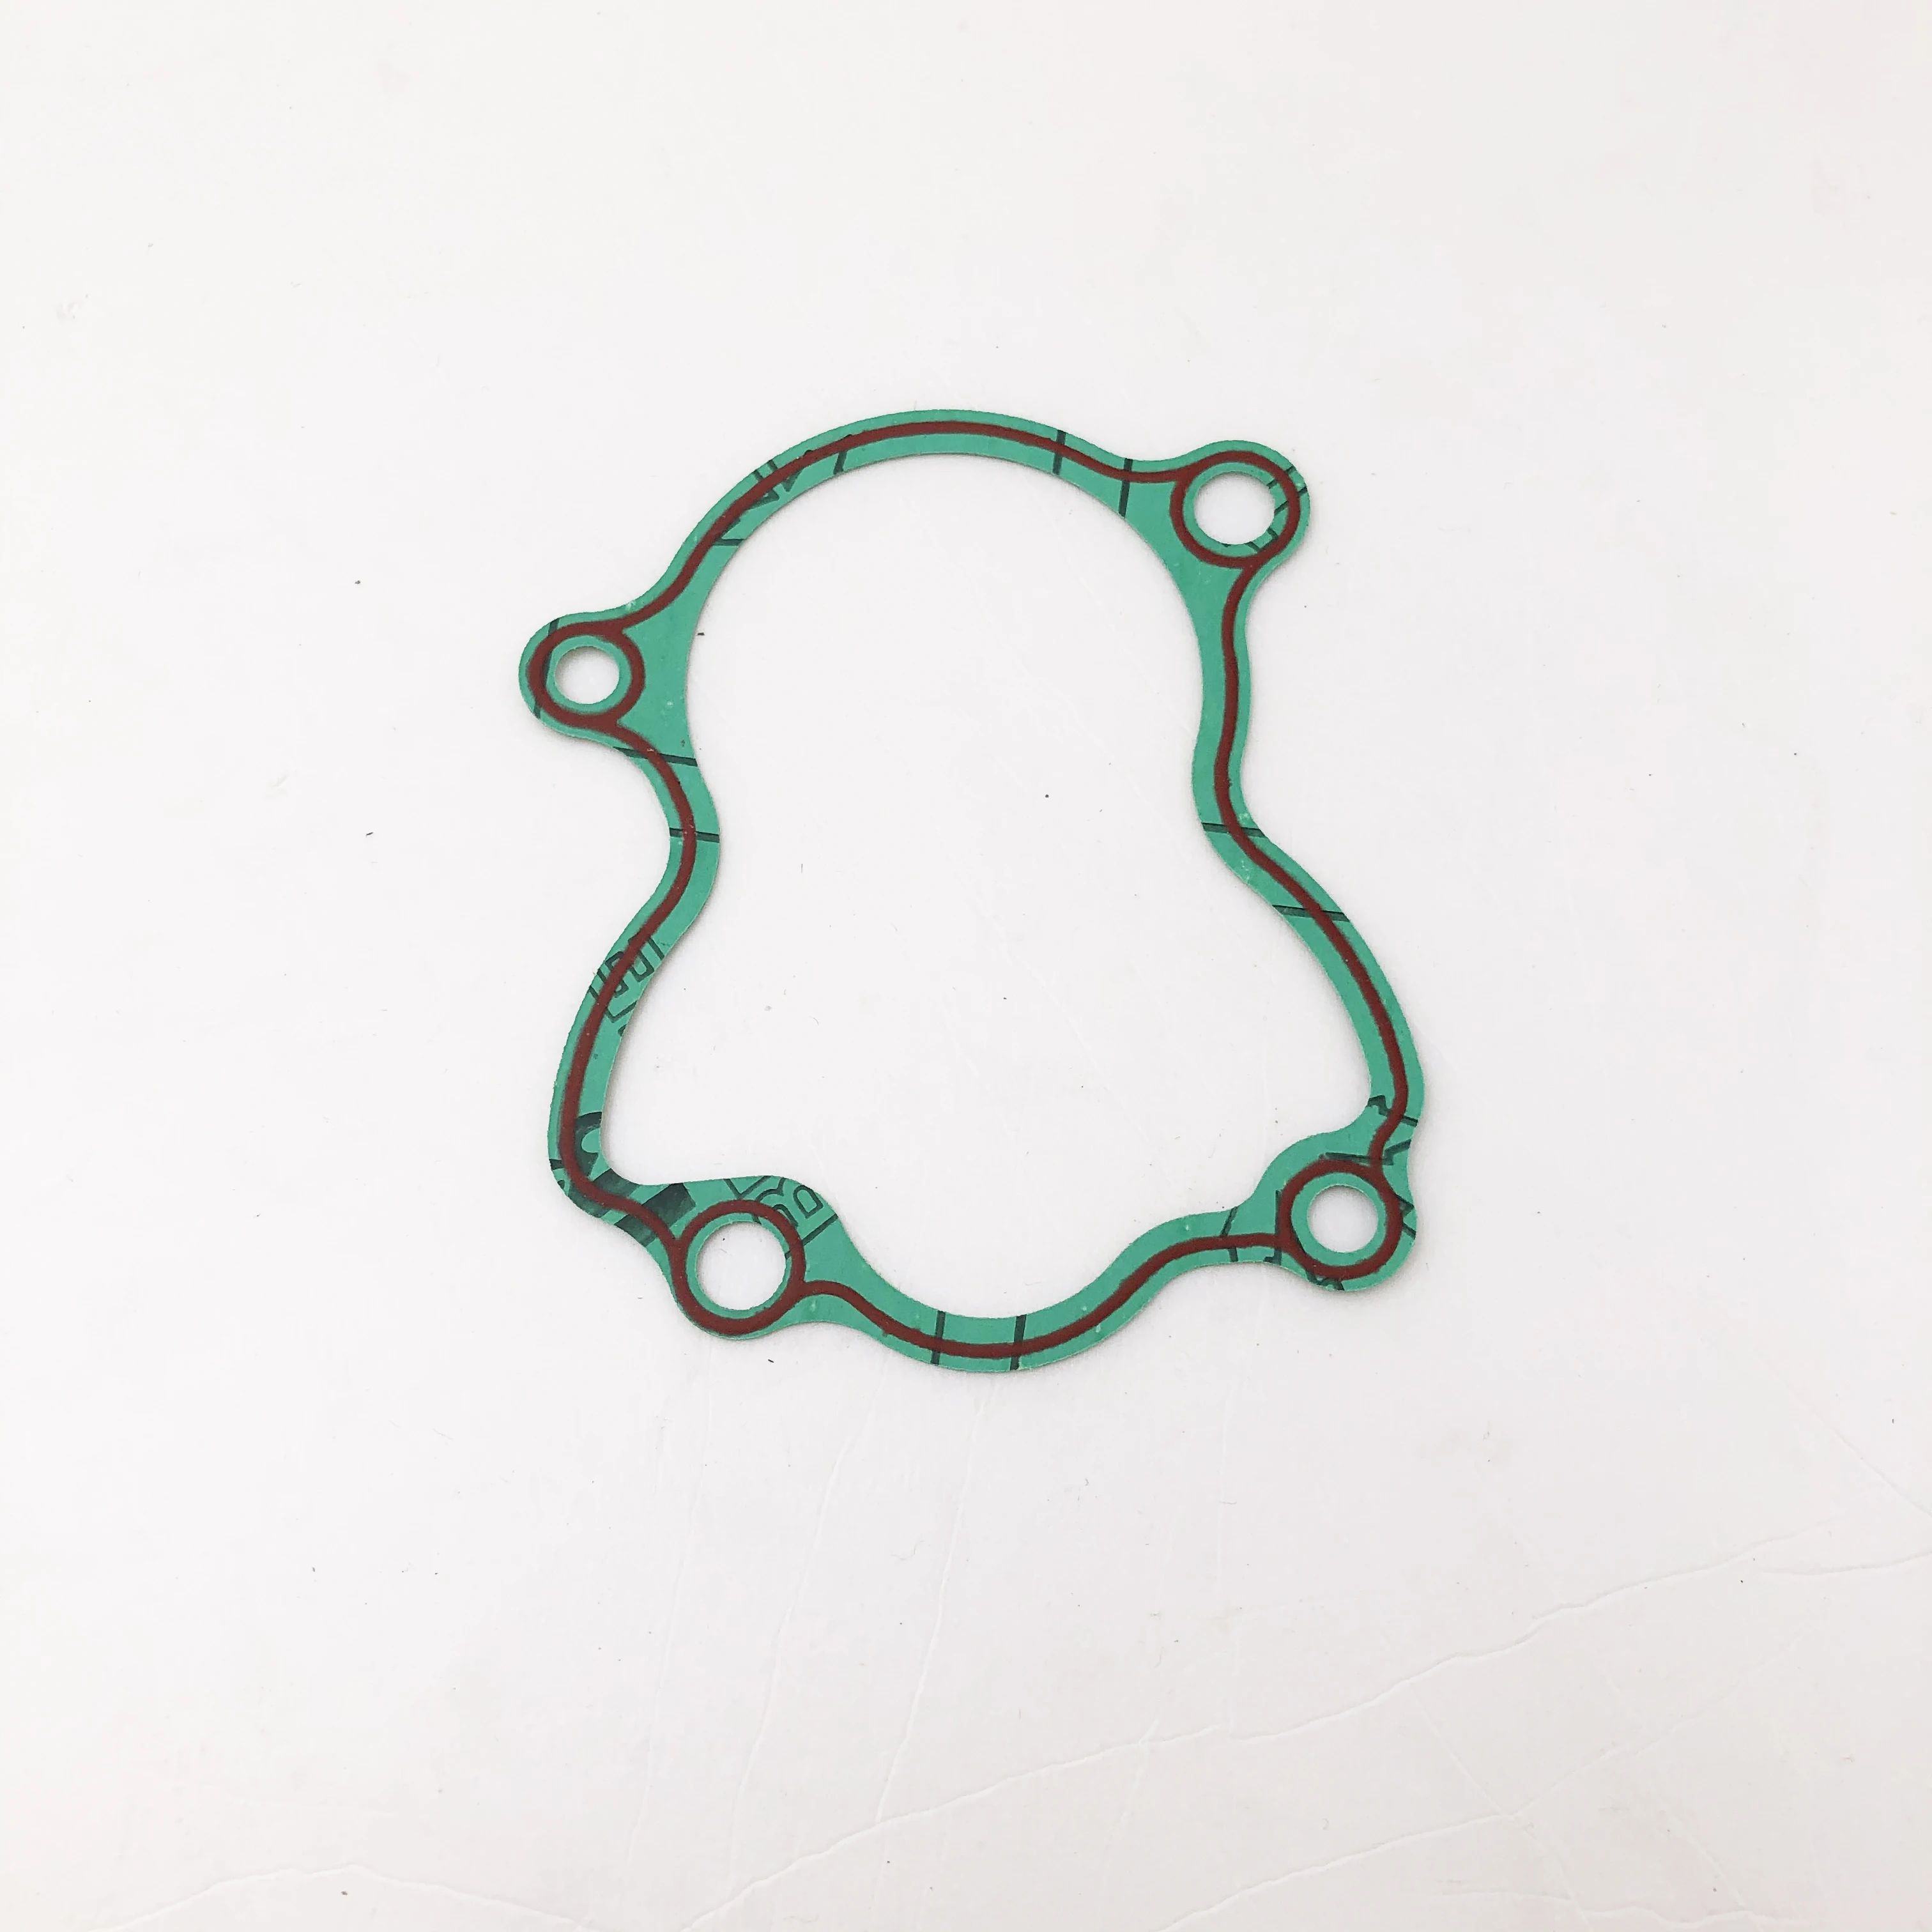 

Gasket Shiftshaft Cover For Hisun 800cc ATV HS Number 23312-004-0000 ERP CODE PO04000114220000